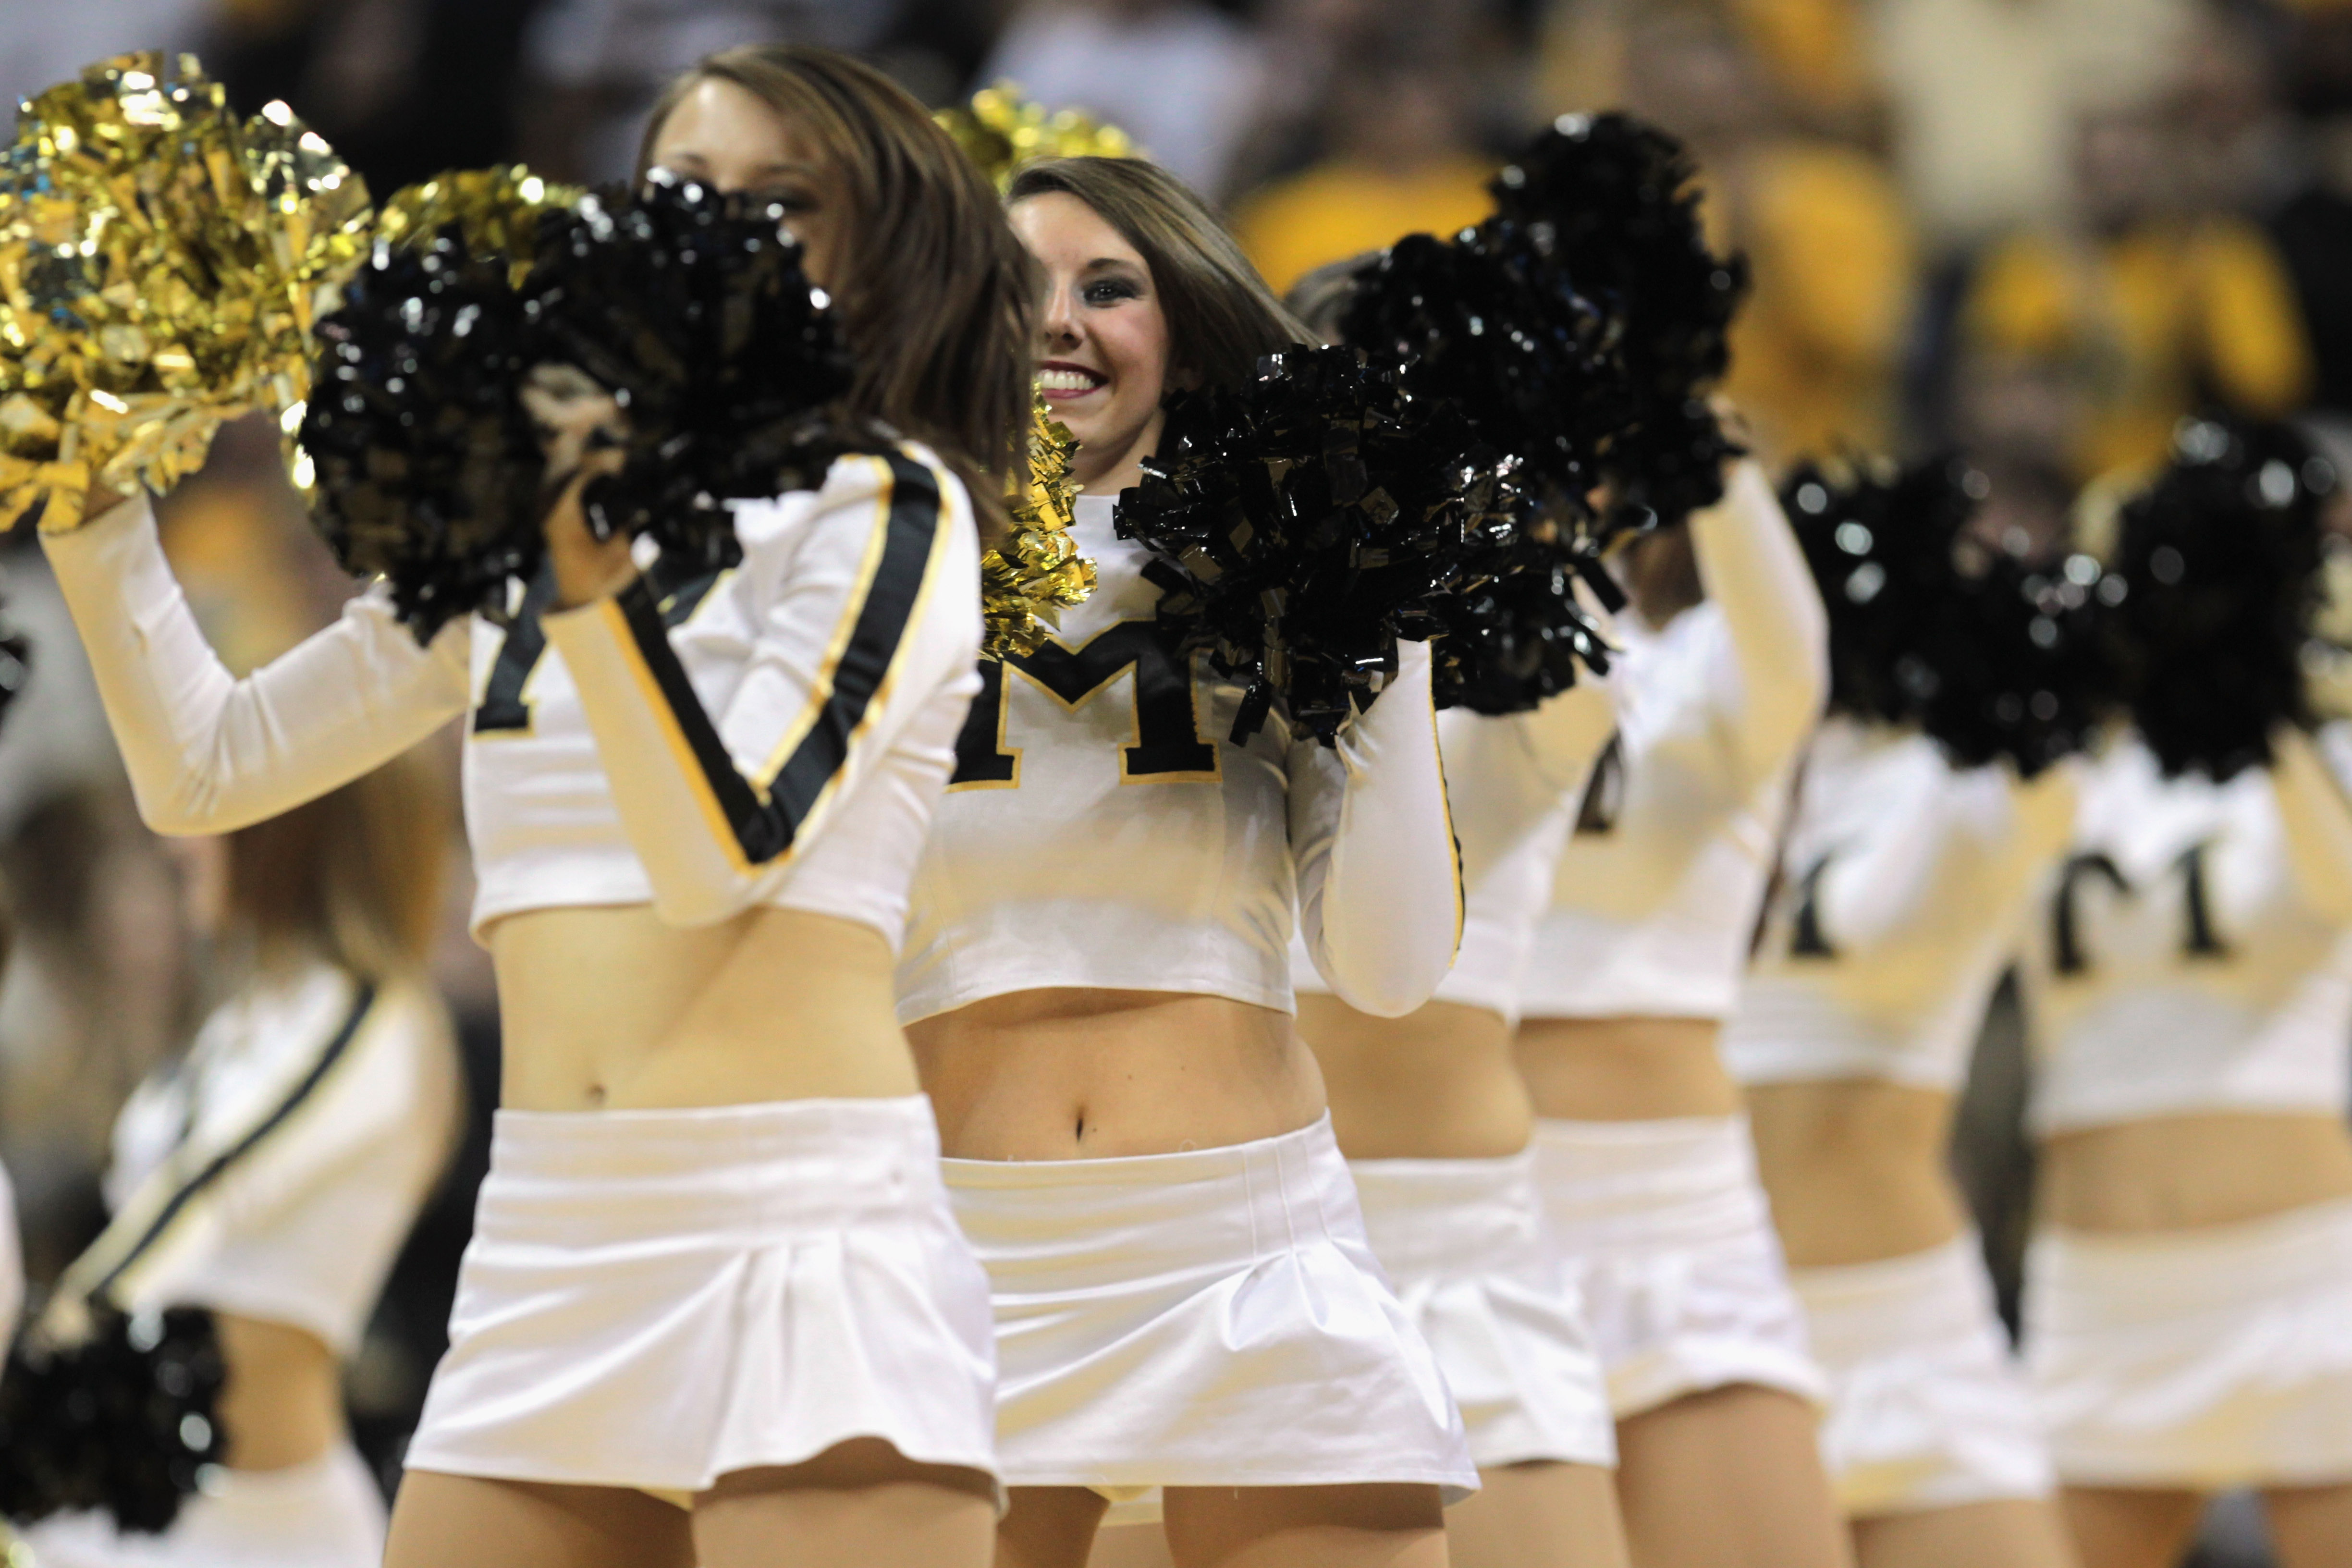 COLUMBIA, MO - DECEMBER 08:  Missouri Tiger cheerleaders in action during the game between the Vanderbilt Commodores and the Missouri Tigers on December 8, 2010 at Mizzou Arena in Columbia, Missouri.  (Photo by Jamie Squire/Getty Images)